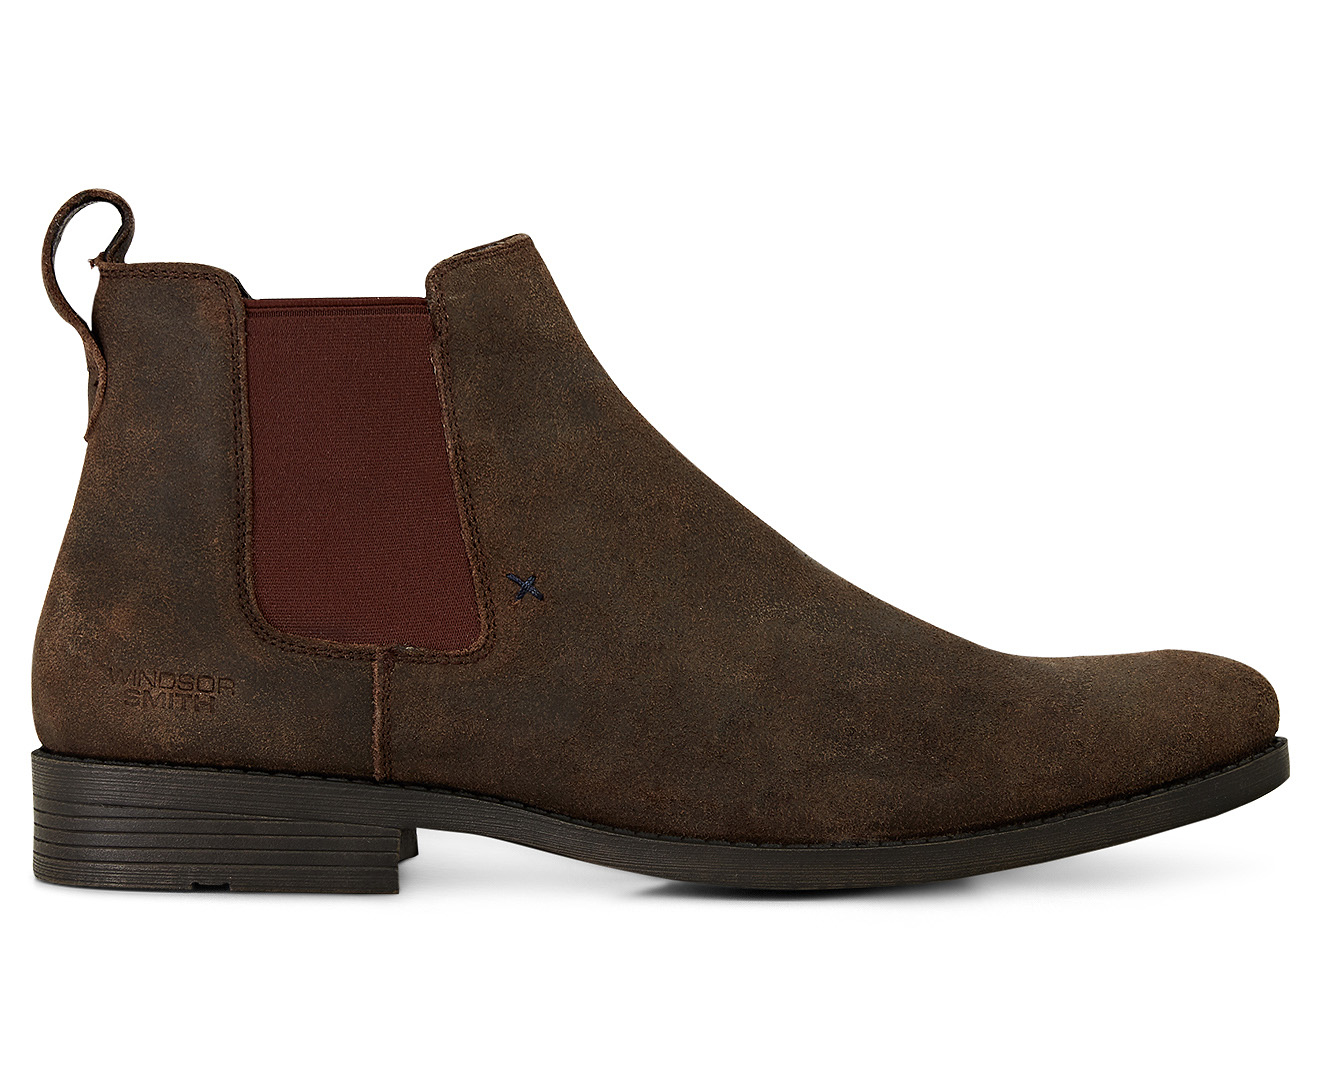 windsor smith suede boots